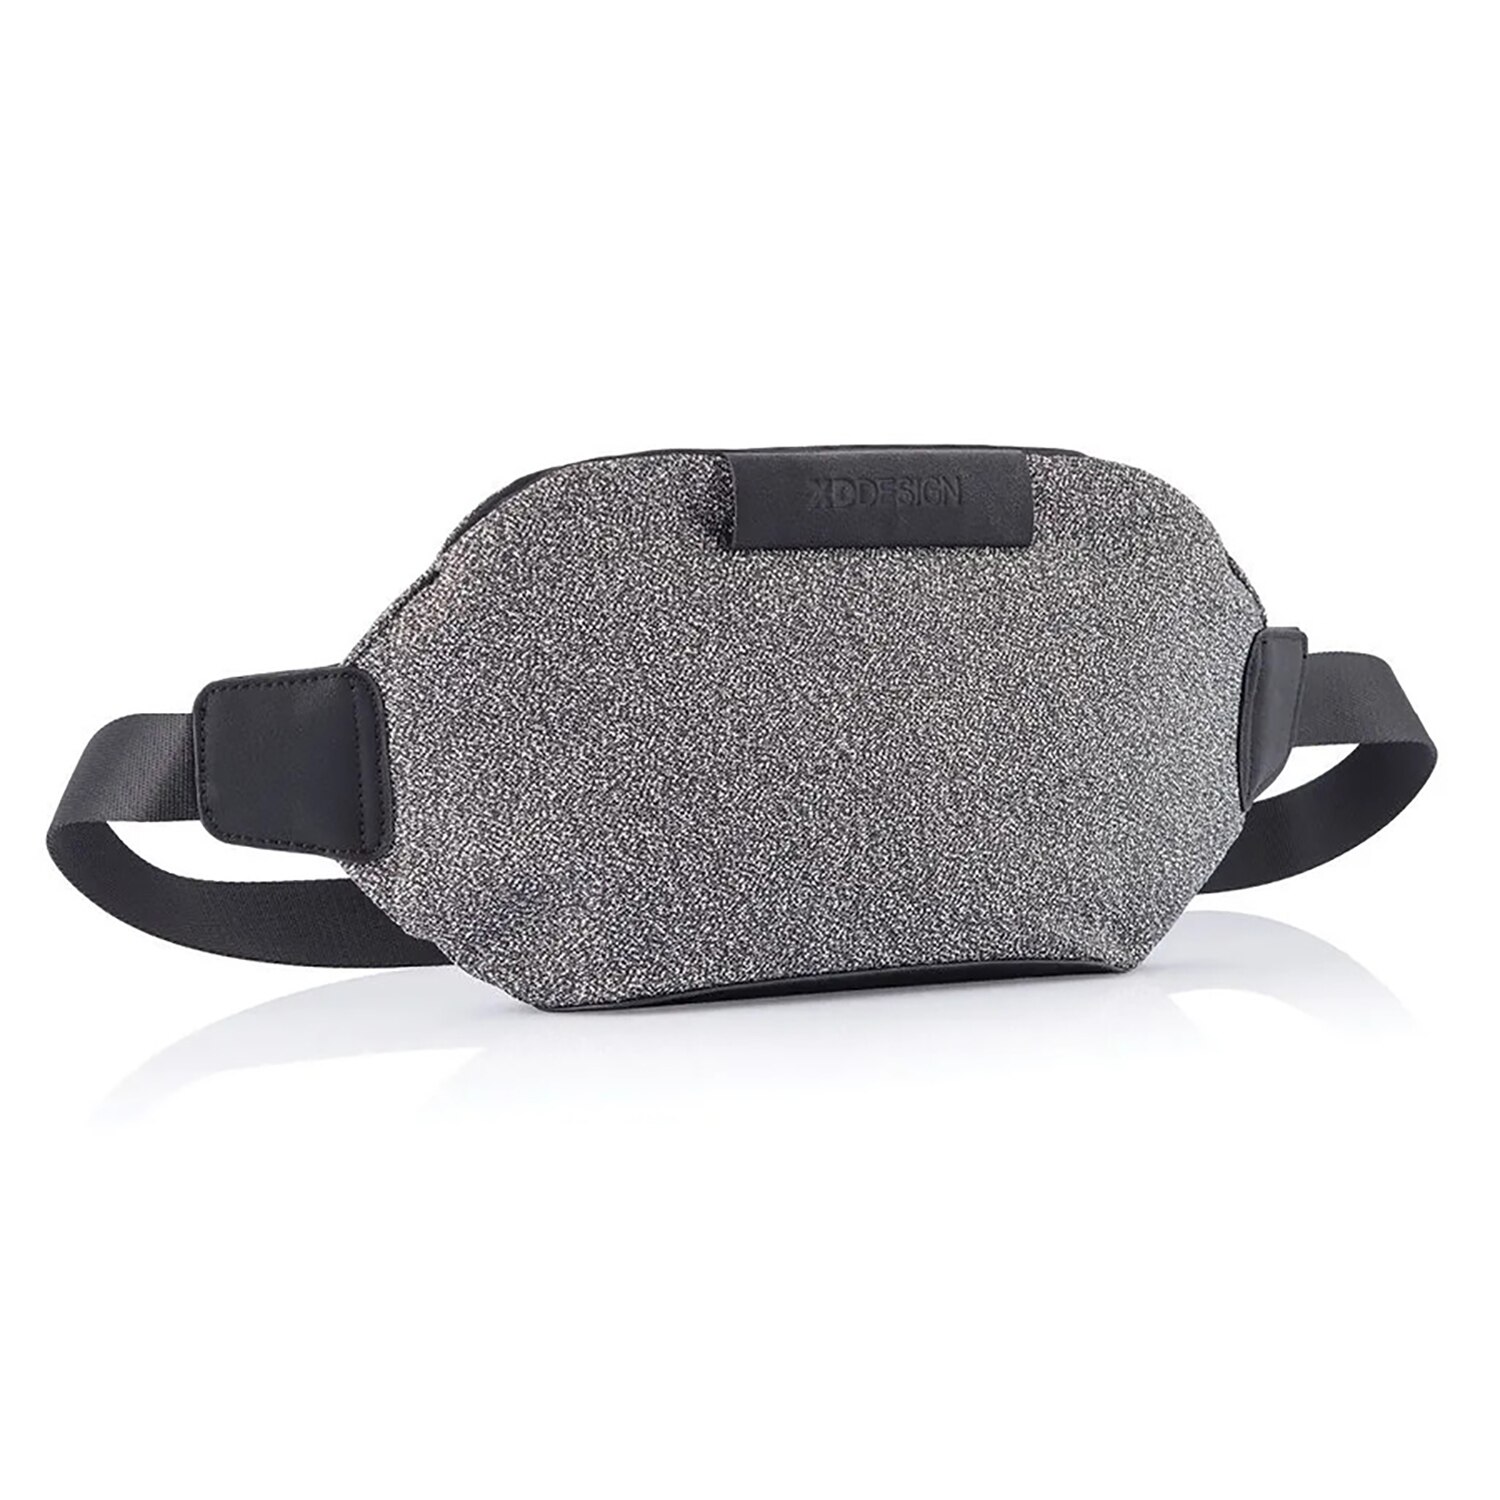 XD Design Urban Carrying Case Waist Pack for 7" Tablet